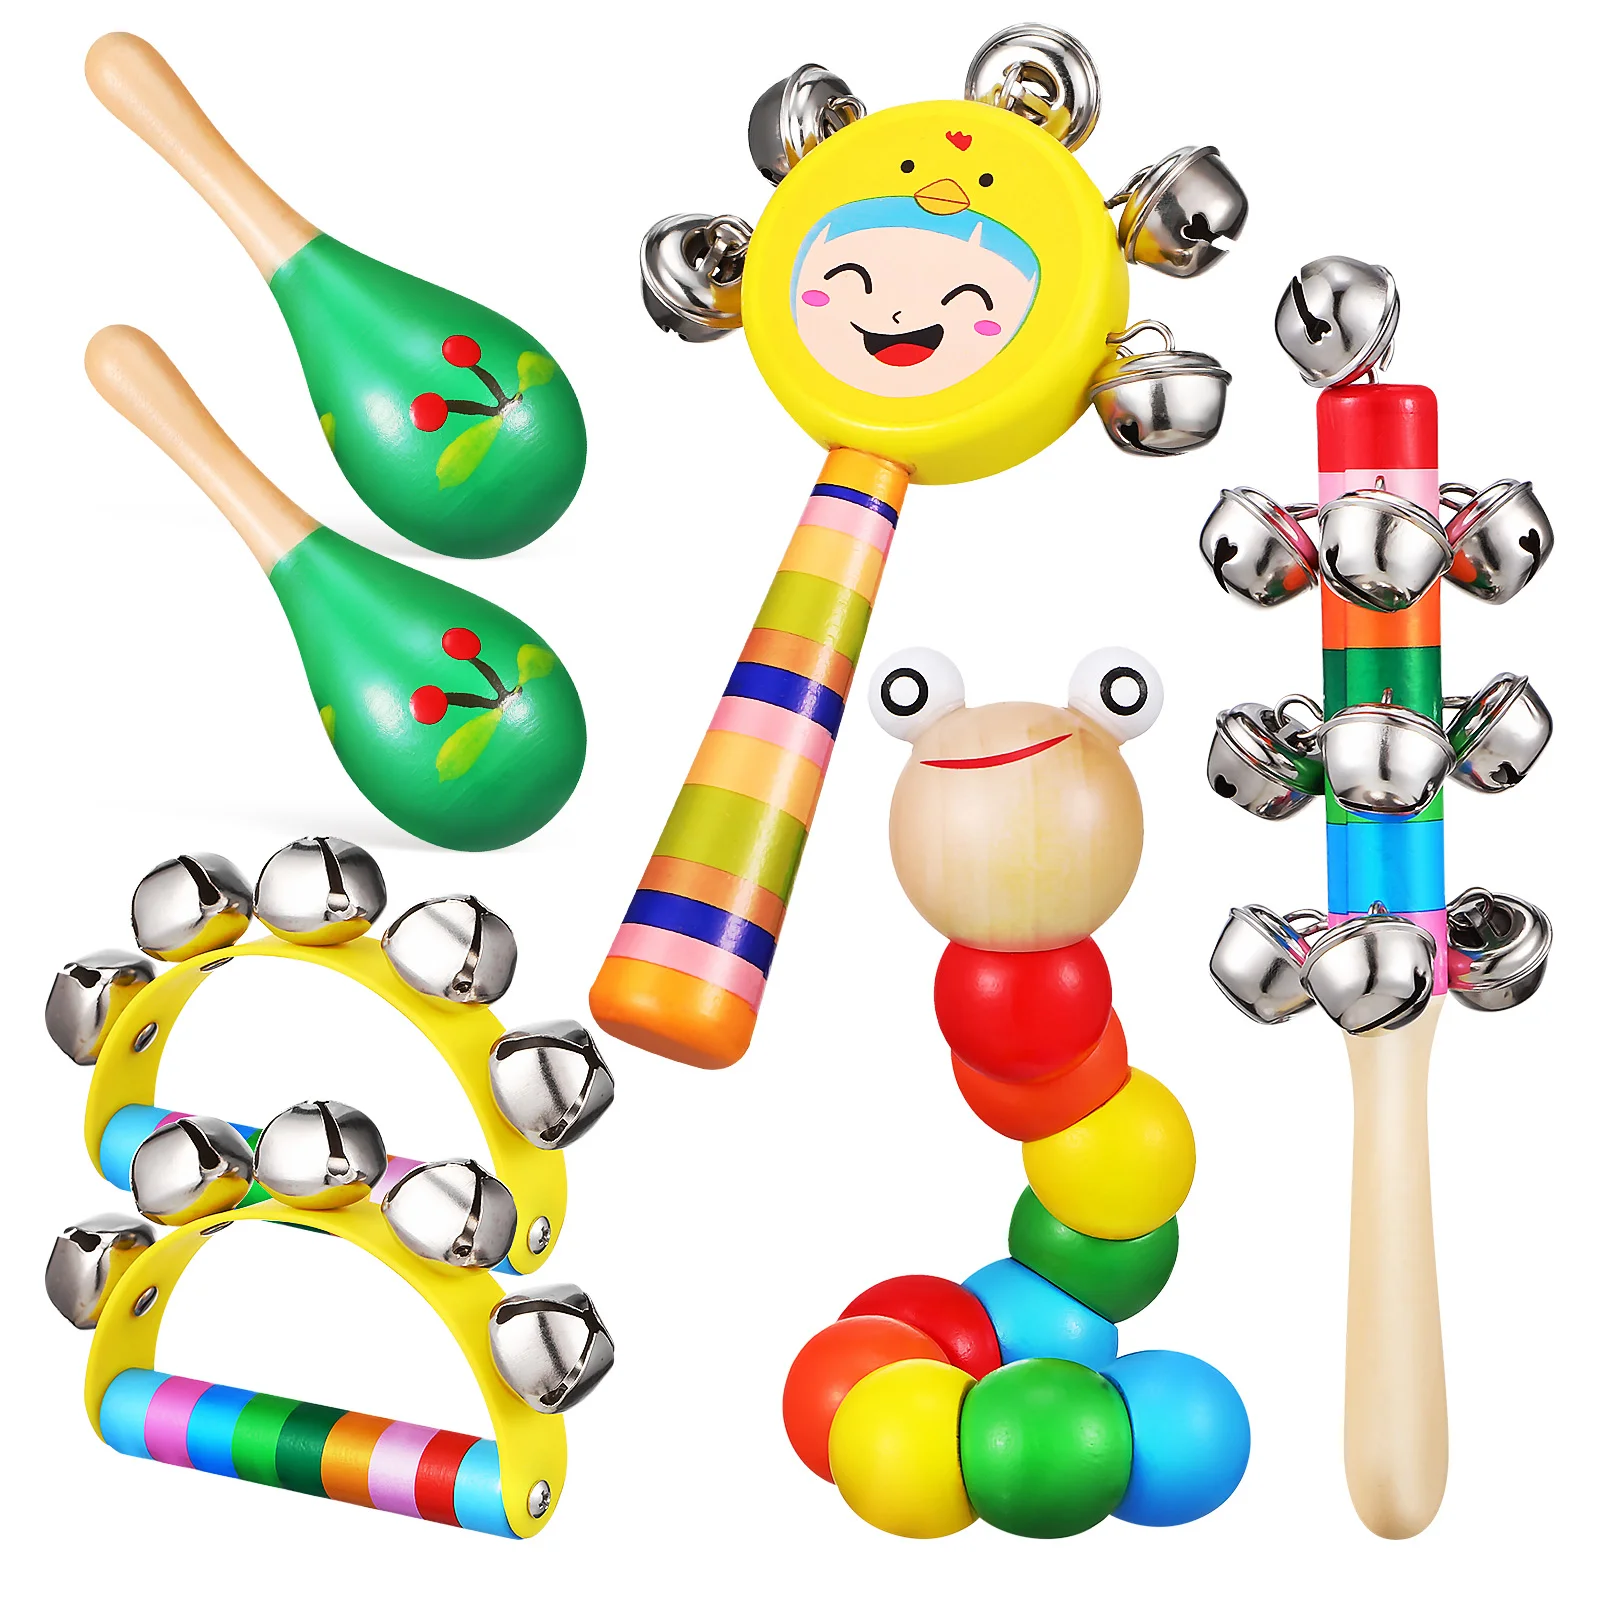 

Hand Toy Small Musical Instruments Bell Wood Rattles Wooden Maracas Percussion Shaker Bells Shaking Baby Toys